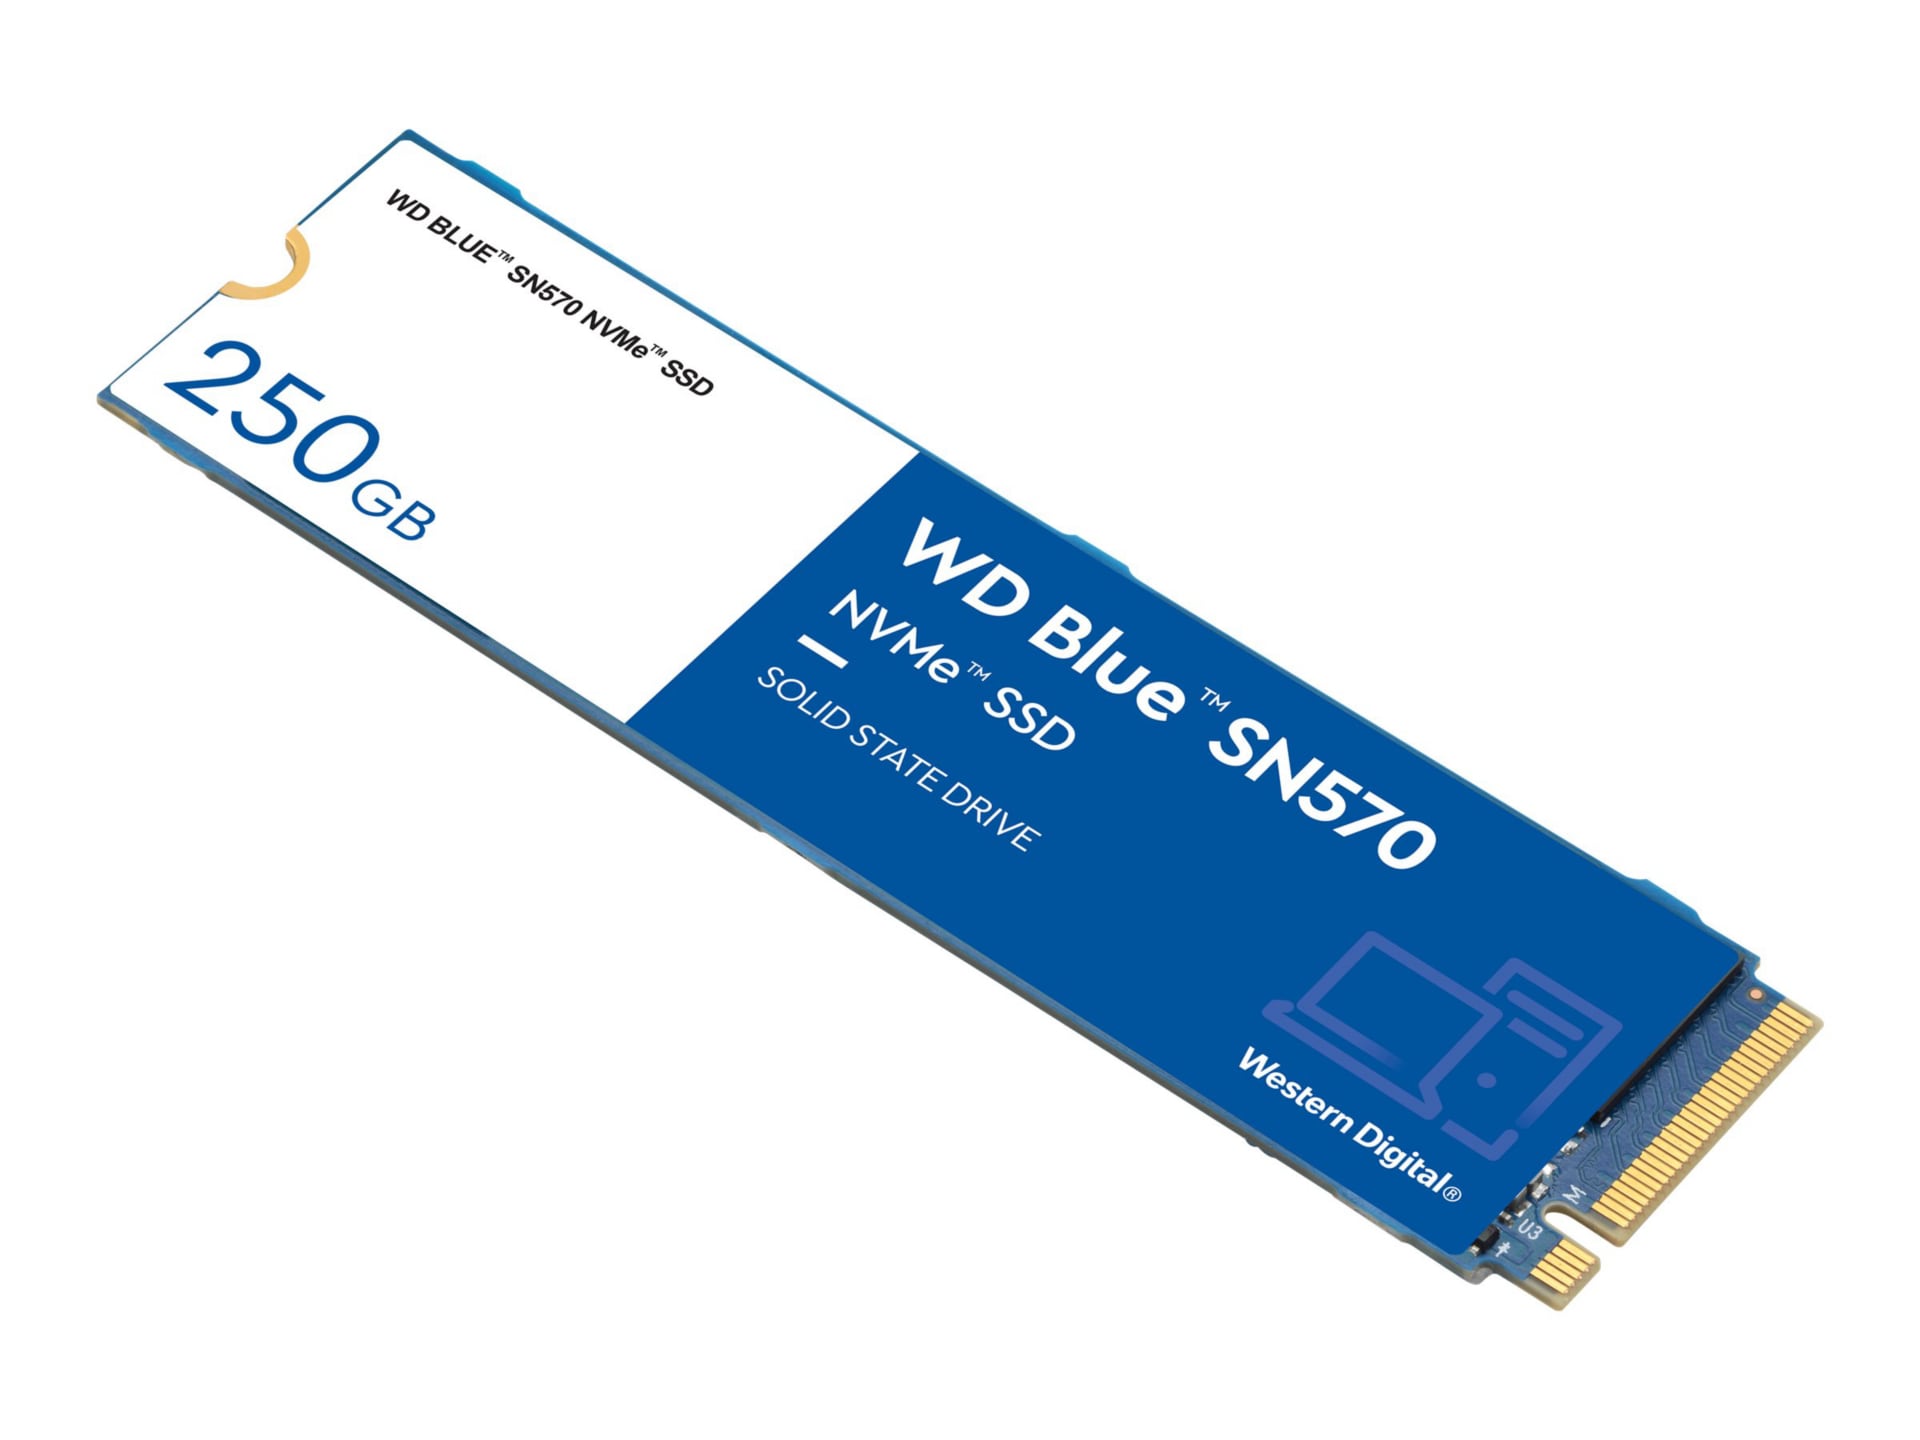 Blue SN570 NVMe SSD WDS250G3B0C - SSD - 250 GB - PCIe 3.0 x4 - WDS250G3B0C - Solid State Drives CDW.com